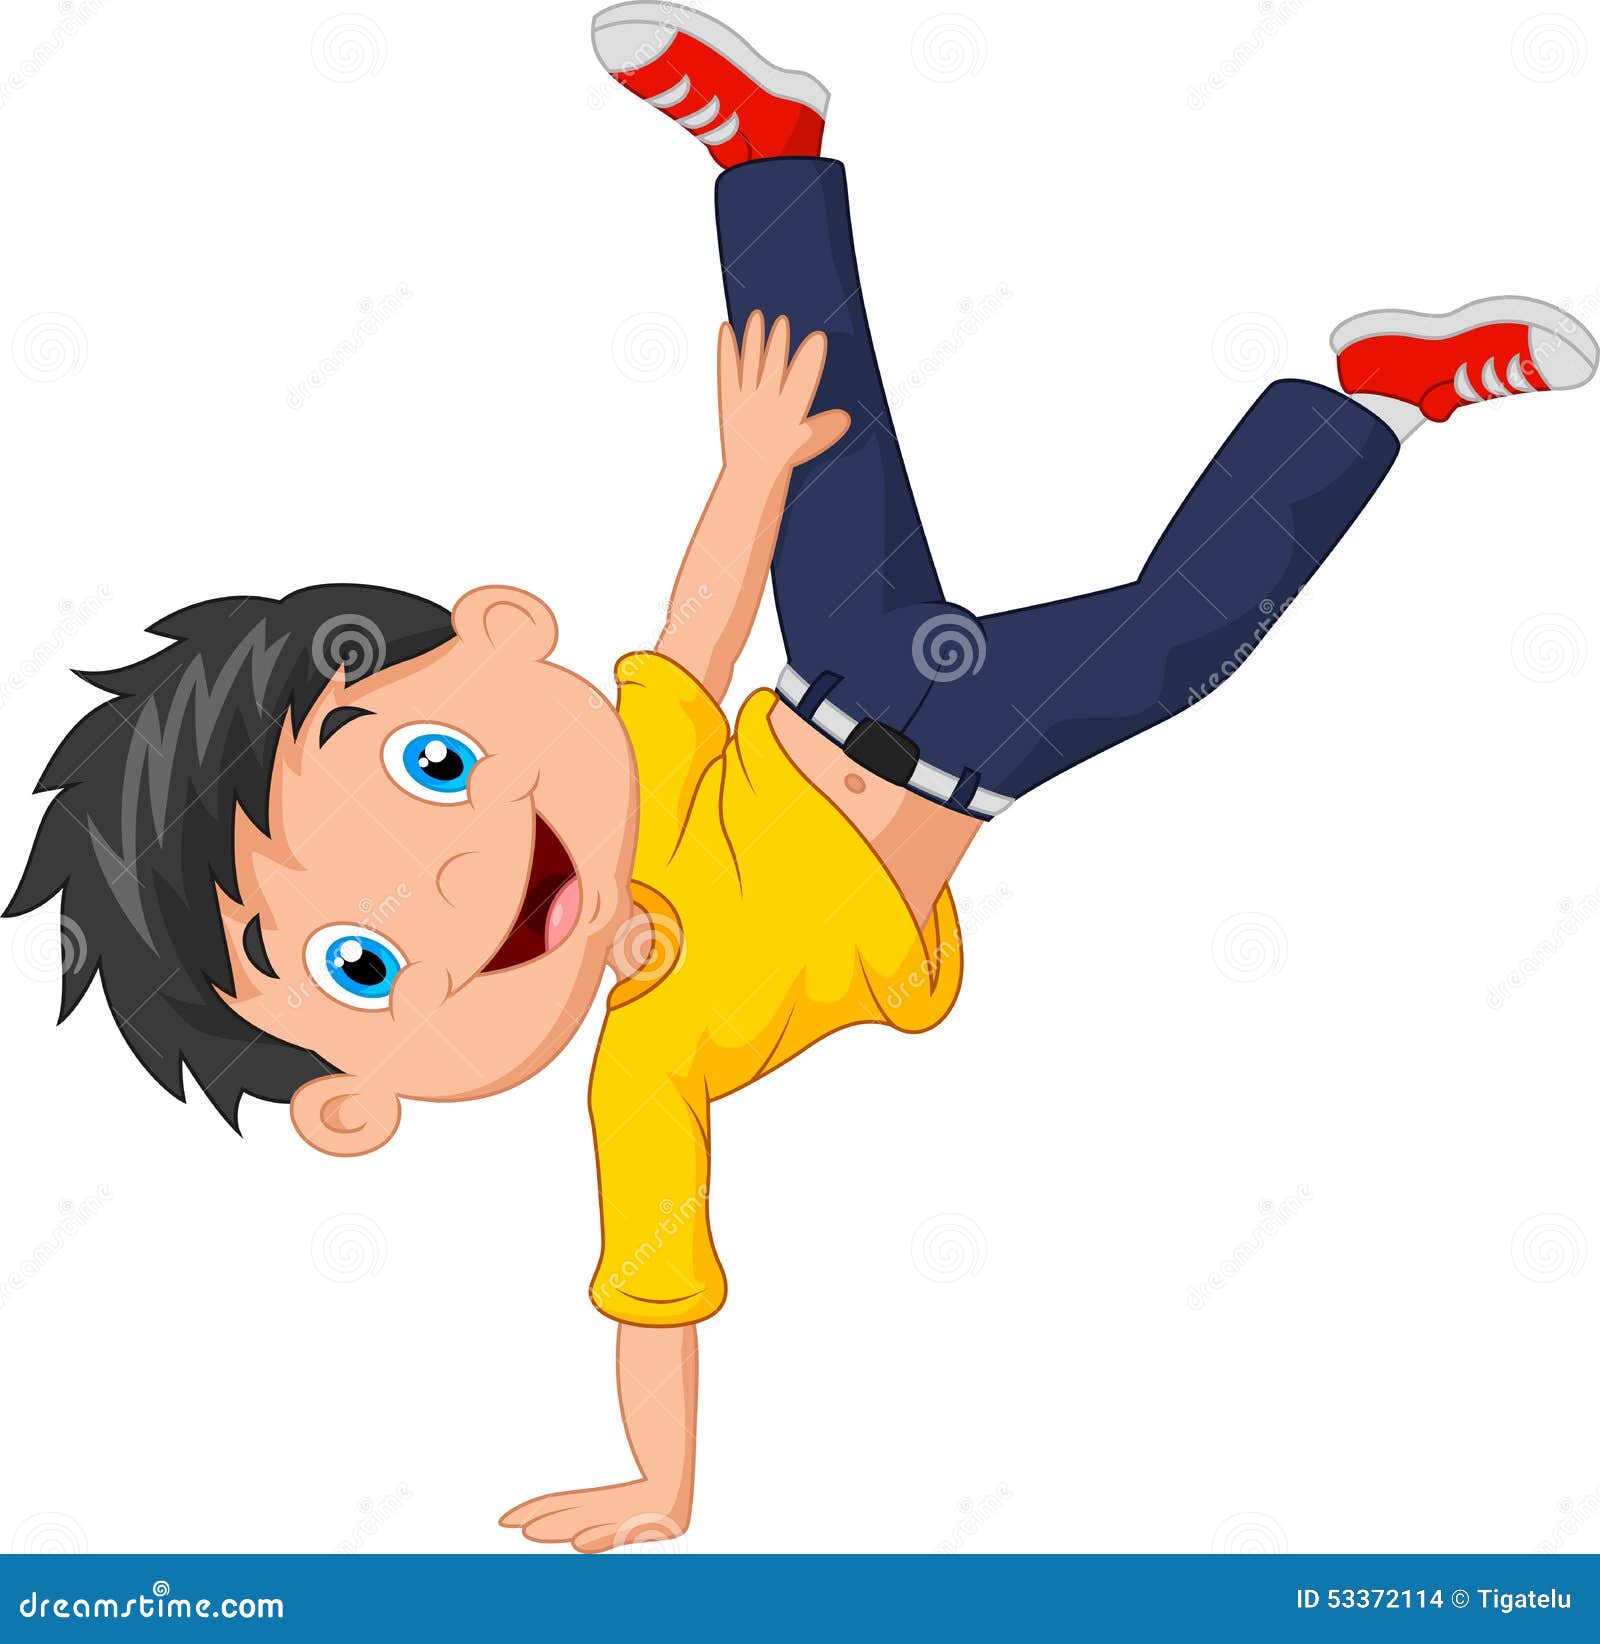 Cartoon Boy Standing on His Hands Stock Vector - Illustration of youthful,  standing: 53372114